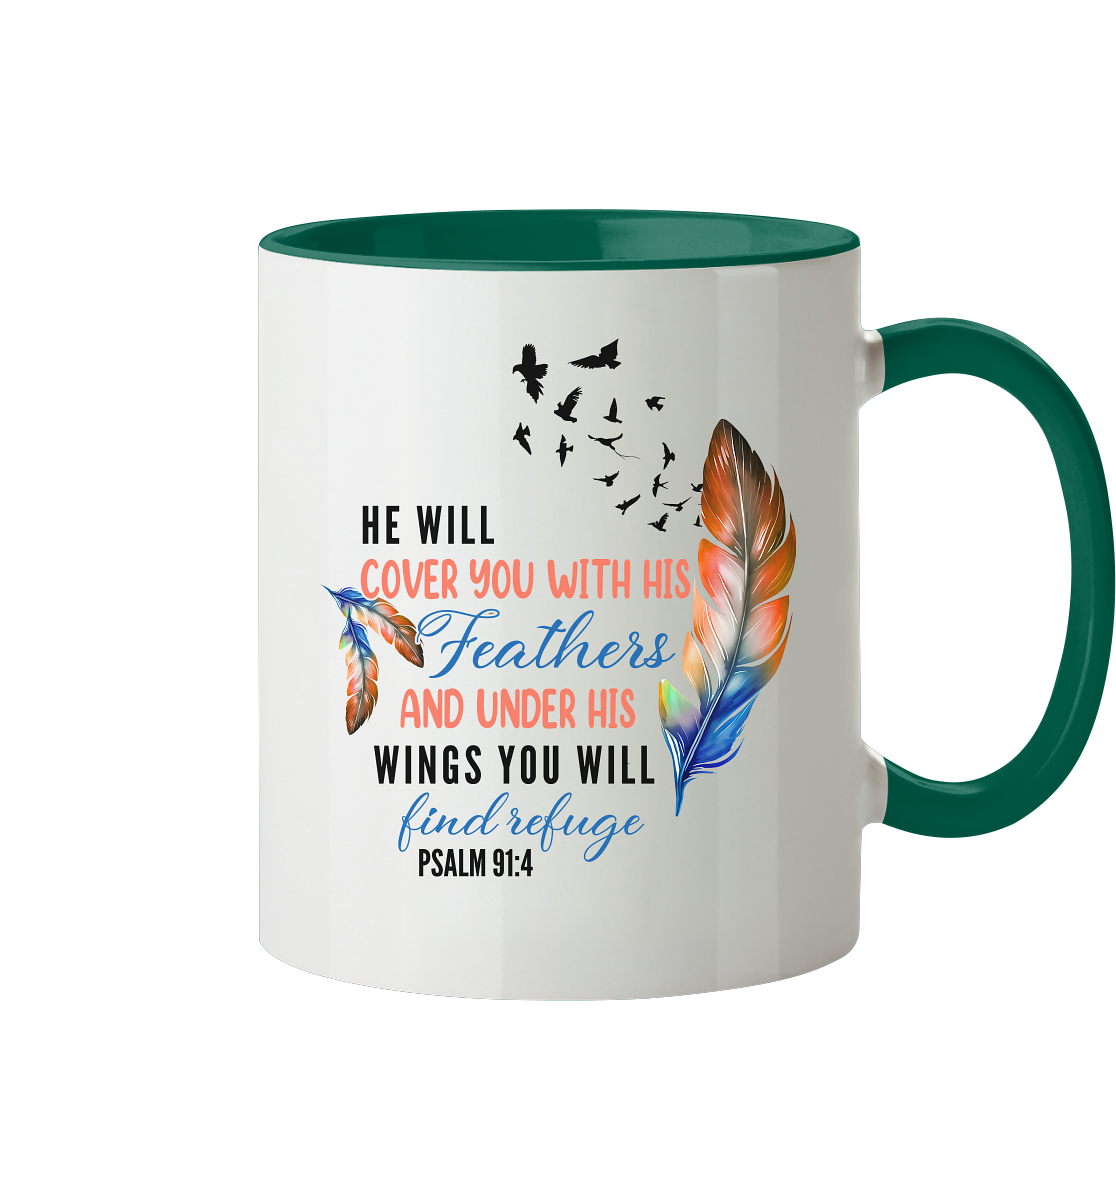 Psalm 91:4 - He will cover you with his Feathers - Tasse zweifarbig